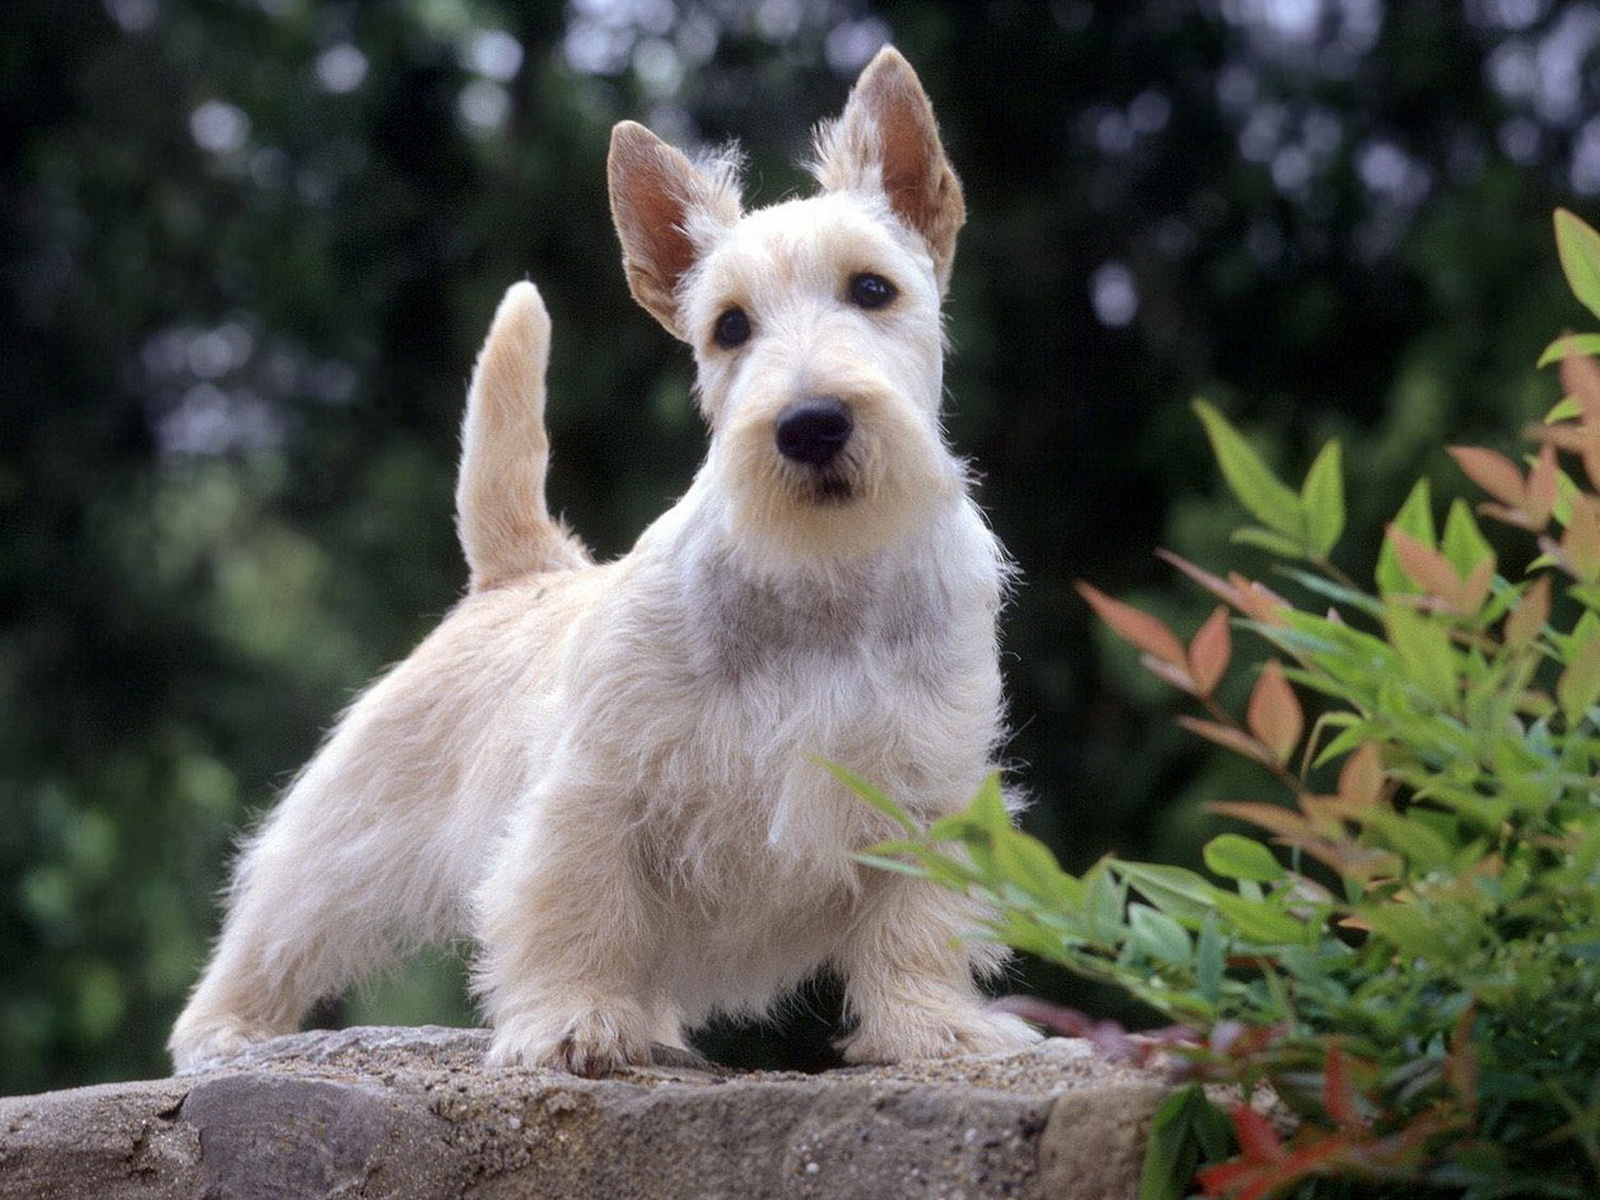 West Highland White Terrier wallpapers and images - wallpapers